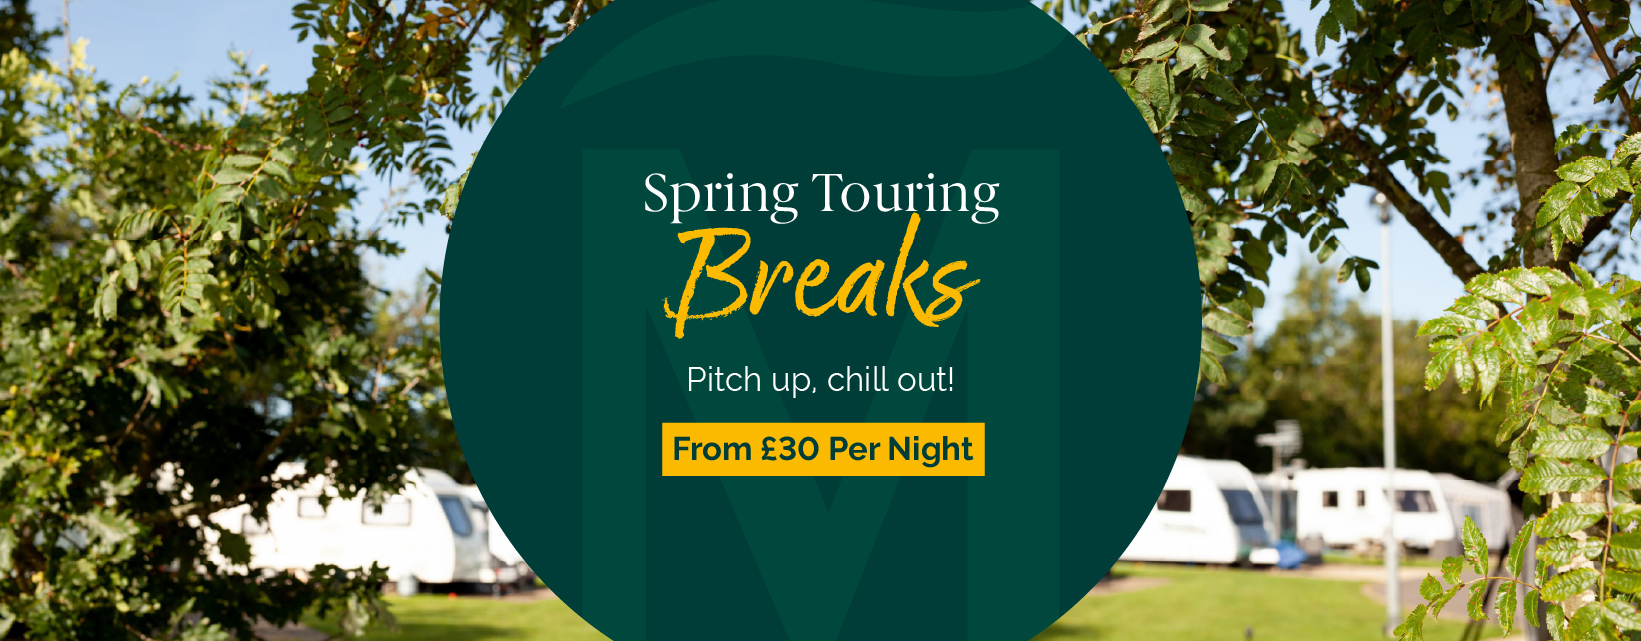 Spring Touring Breaks from £30 per night